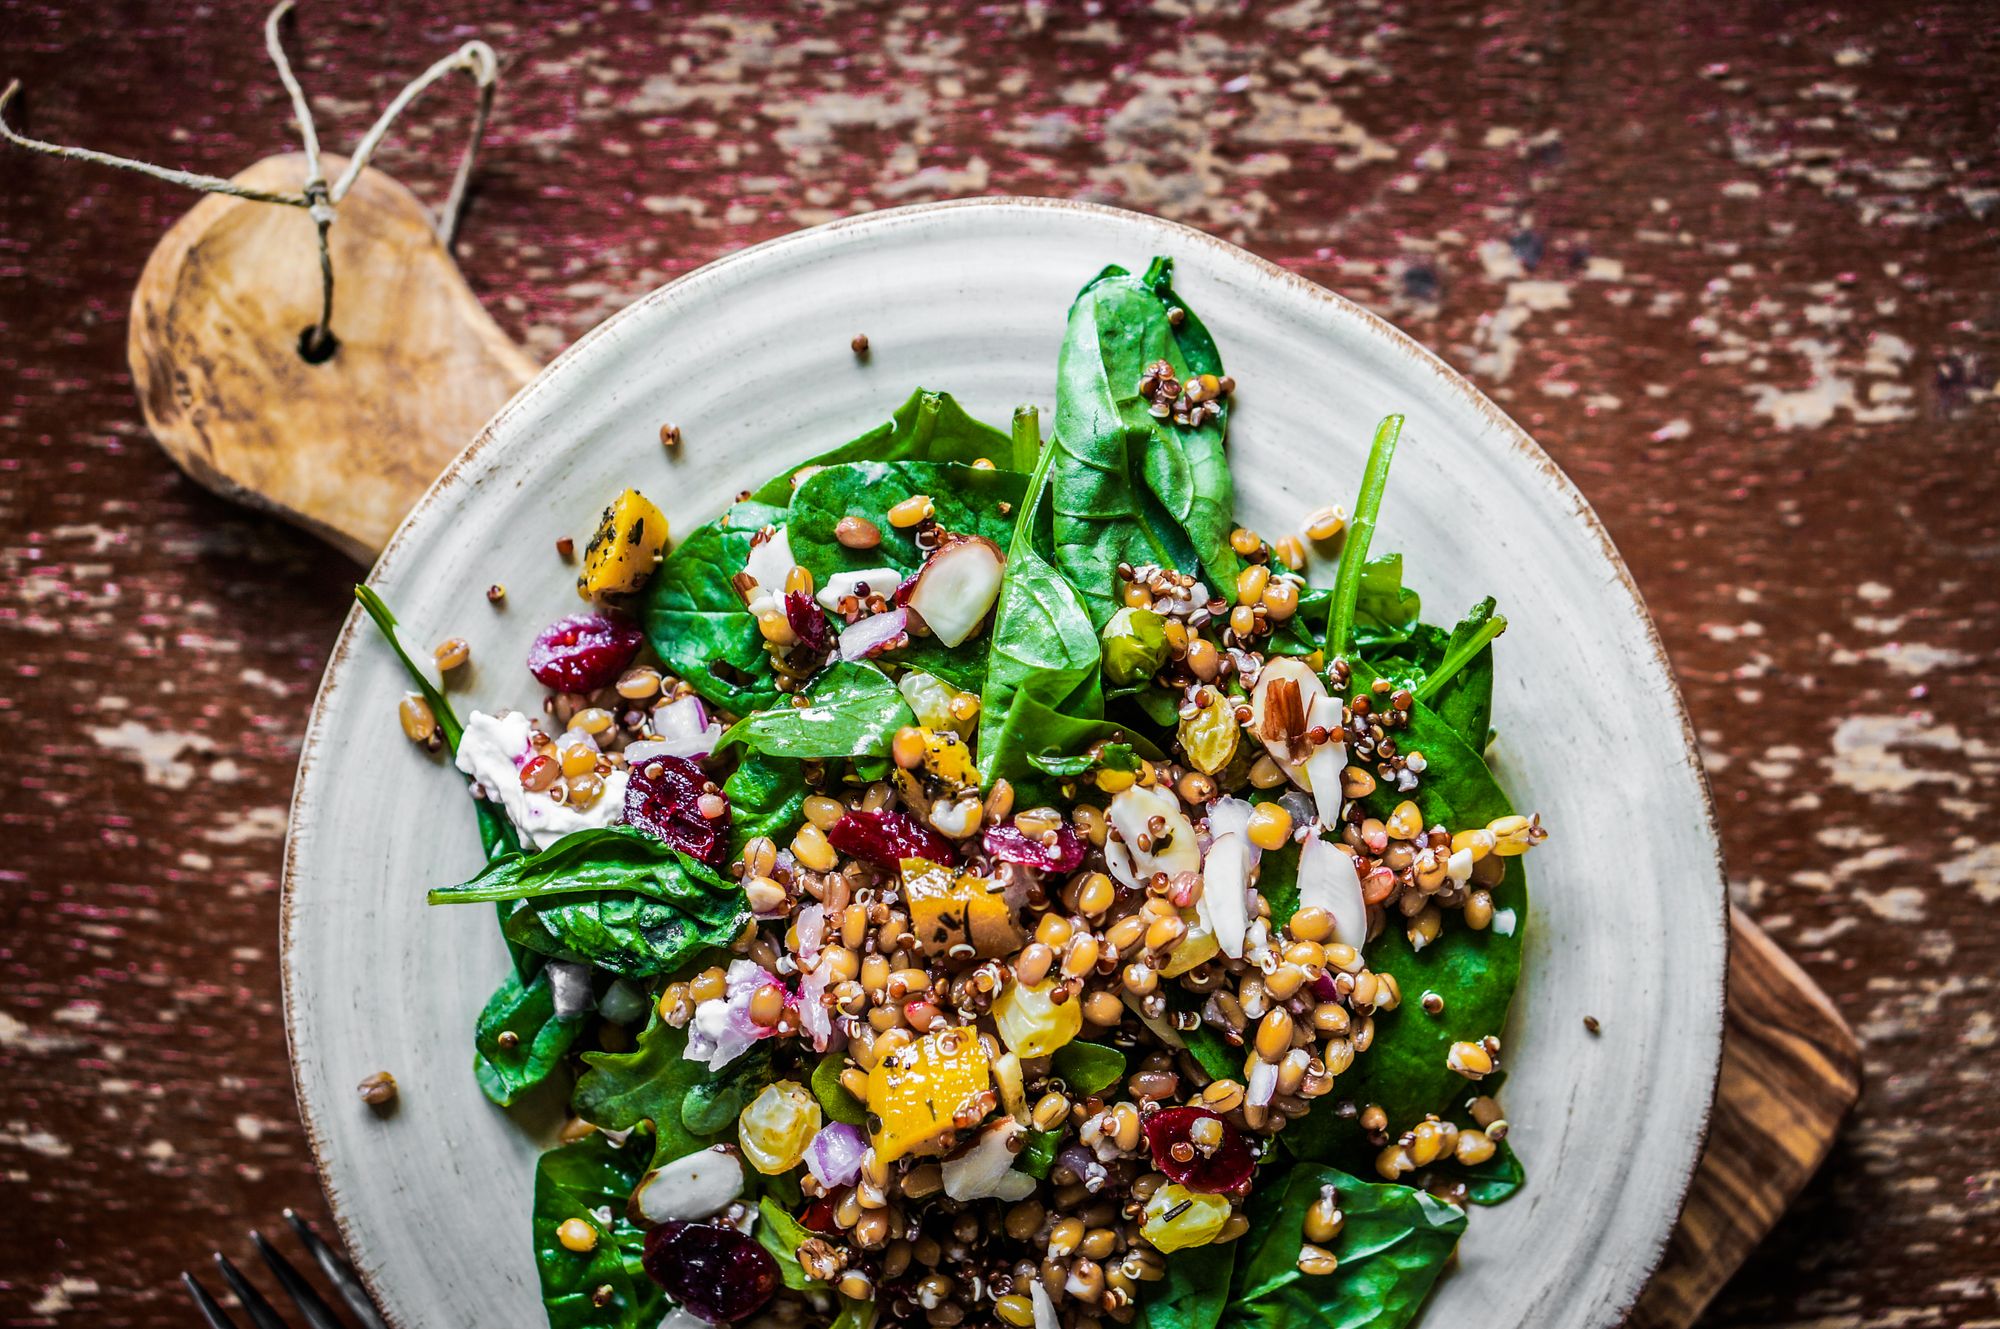 Spinach with Raisins, Chickpeas, and Pine Nuts